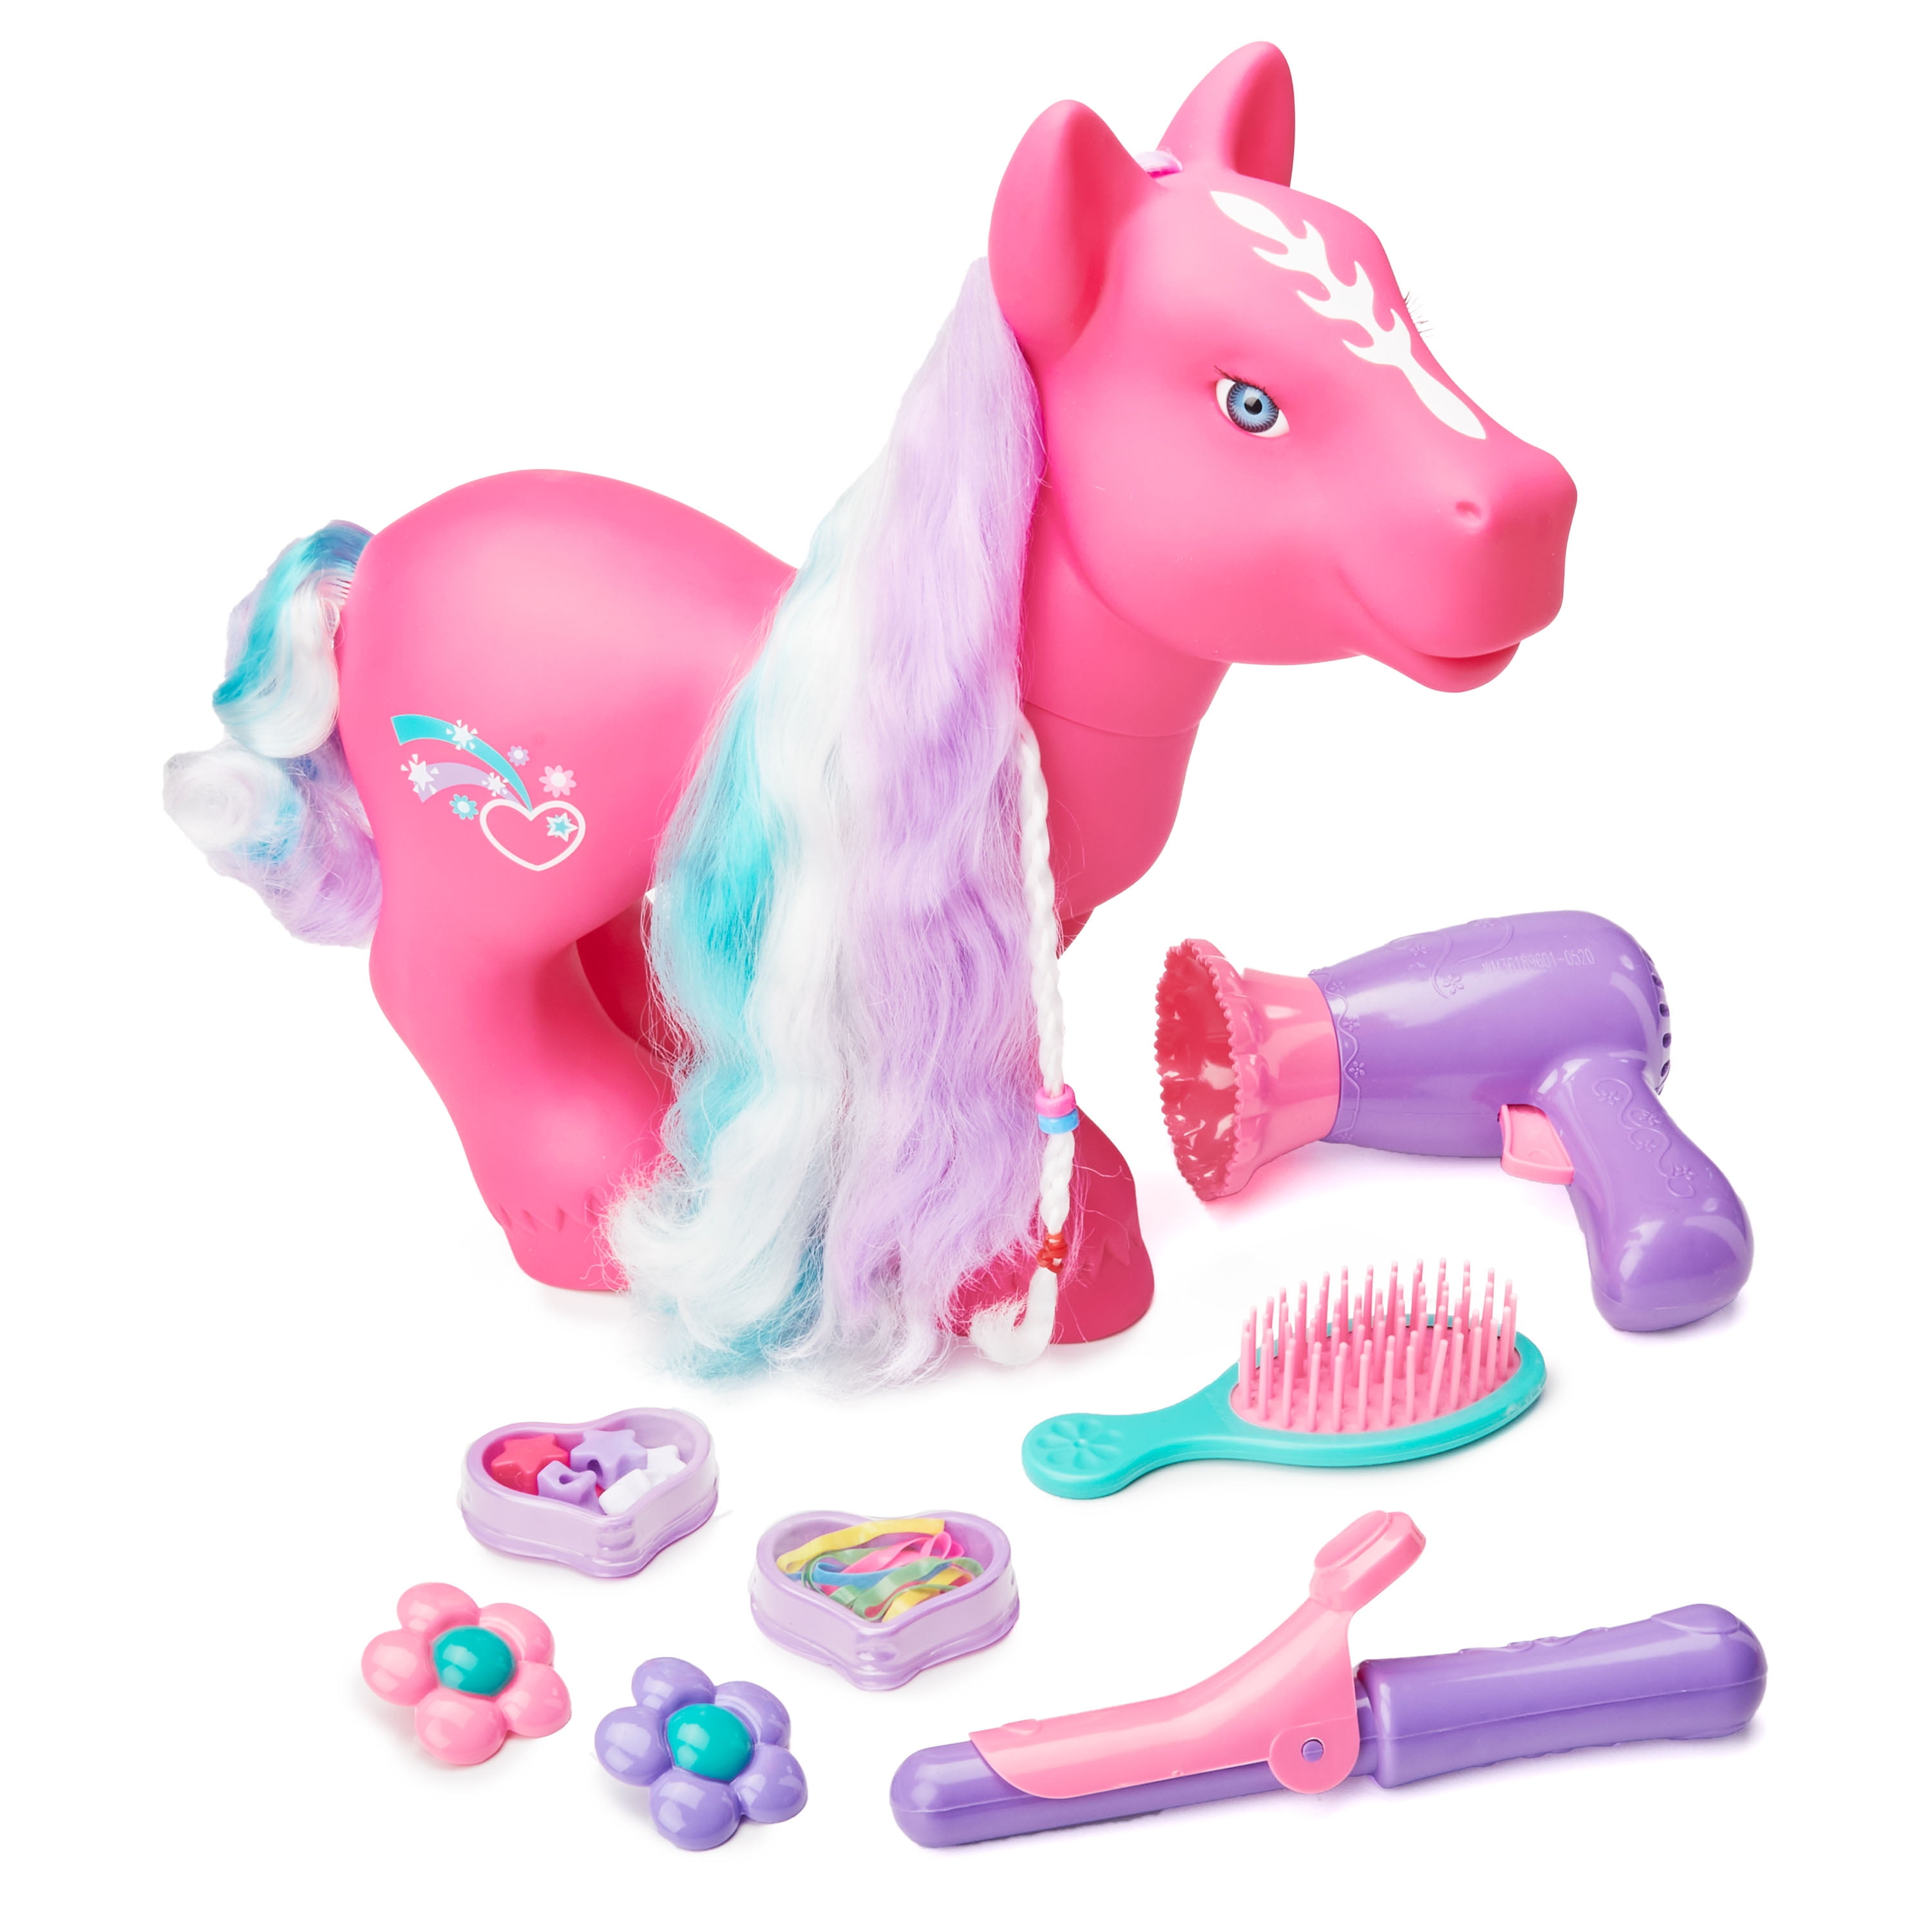 SET OF 2 PRETTY PONY WITH ACCESSORIES GIRLS TOY GIFT BRUSHABLE HAIR LARGE NEW 